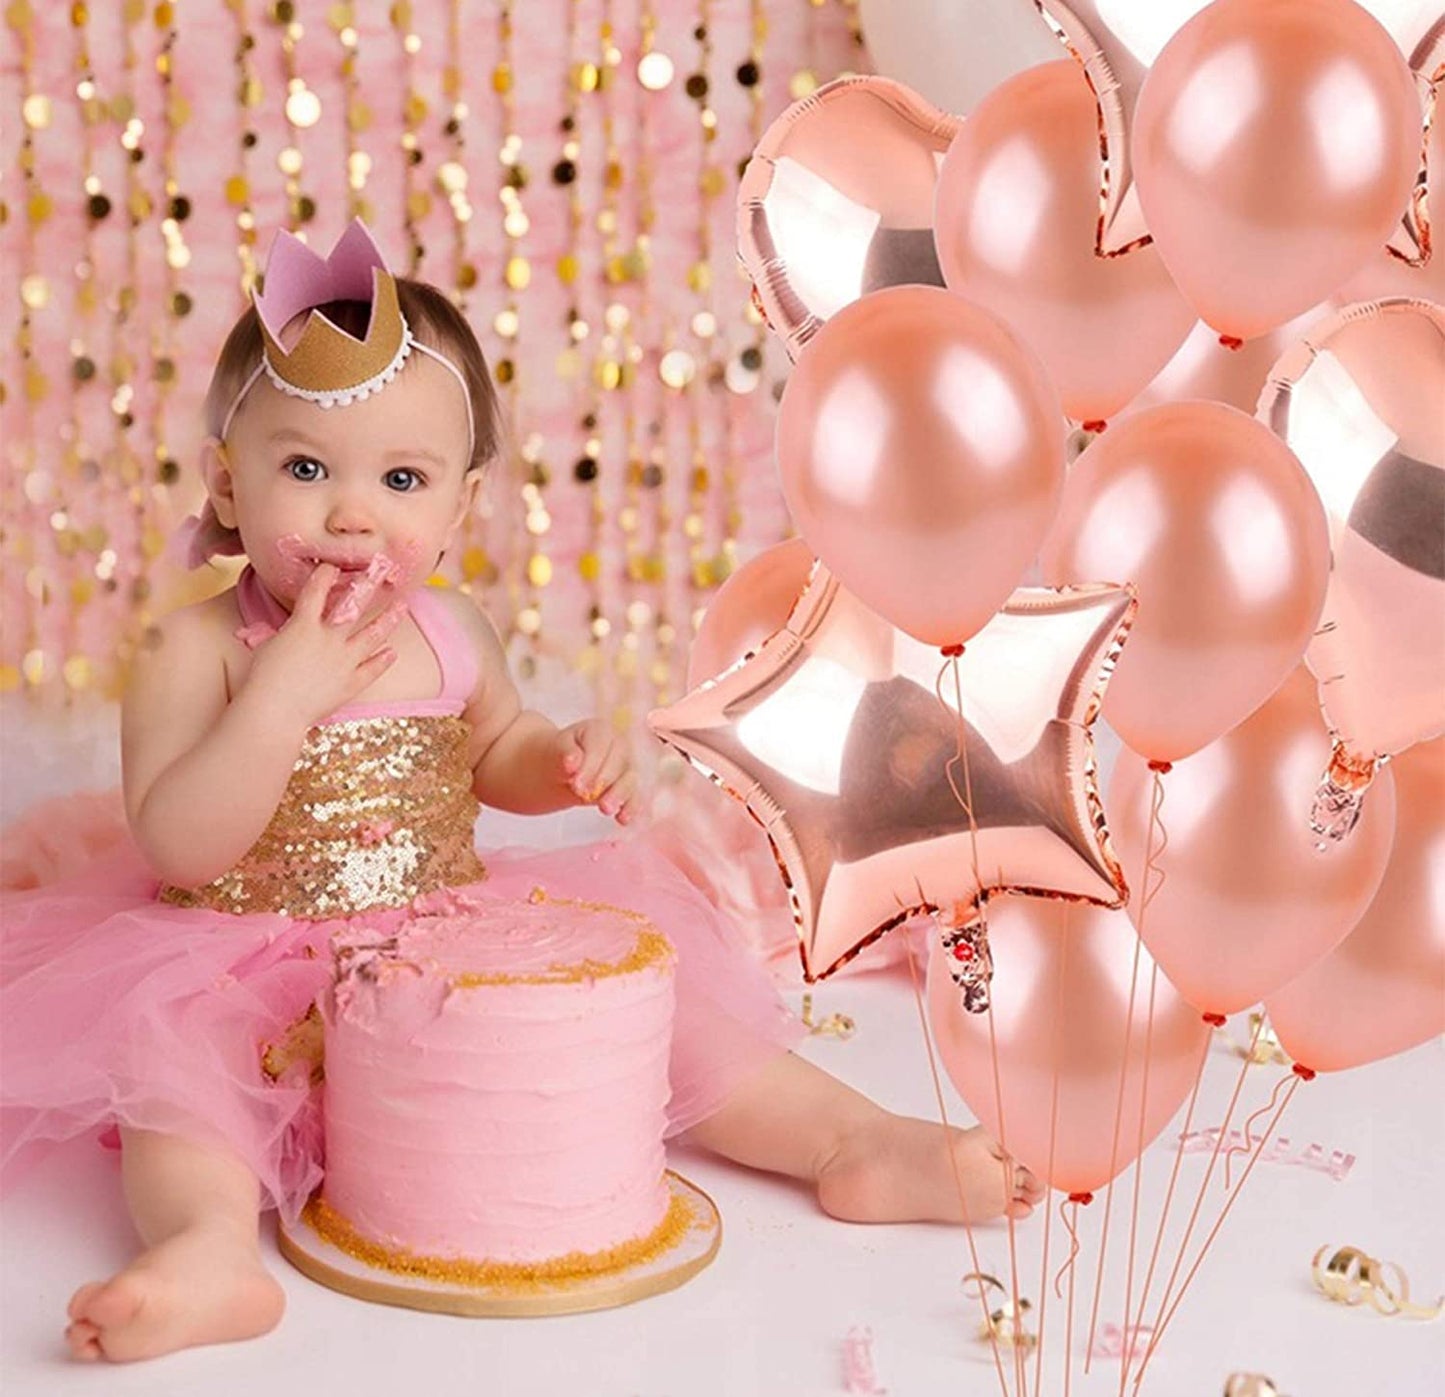 Number 8 Rose Gold Foil Balloon 16 Inches - Balloonistics